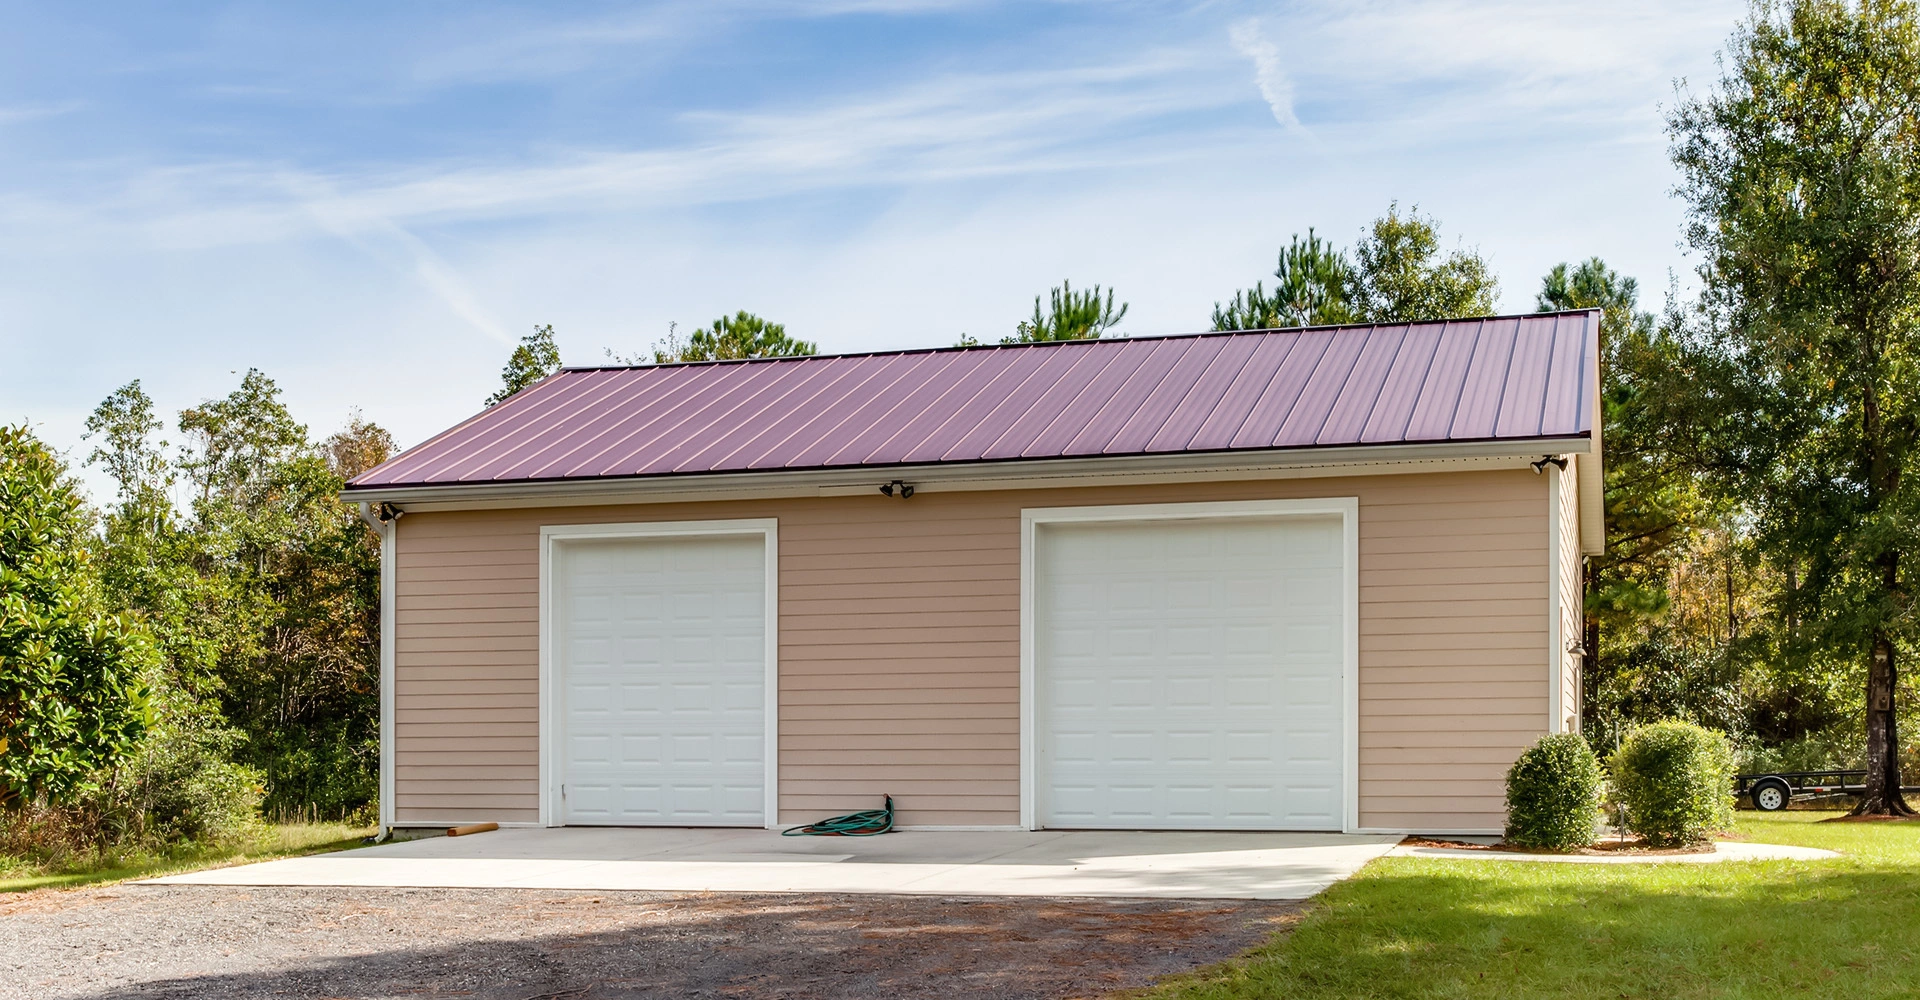 24x36 Metal Building  Lowest Price Start From $3670